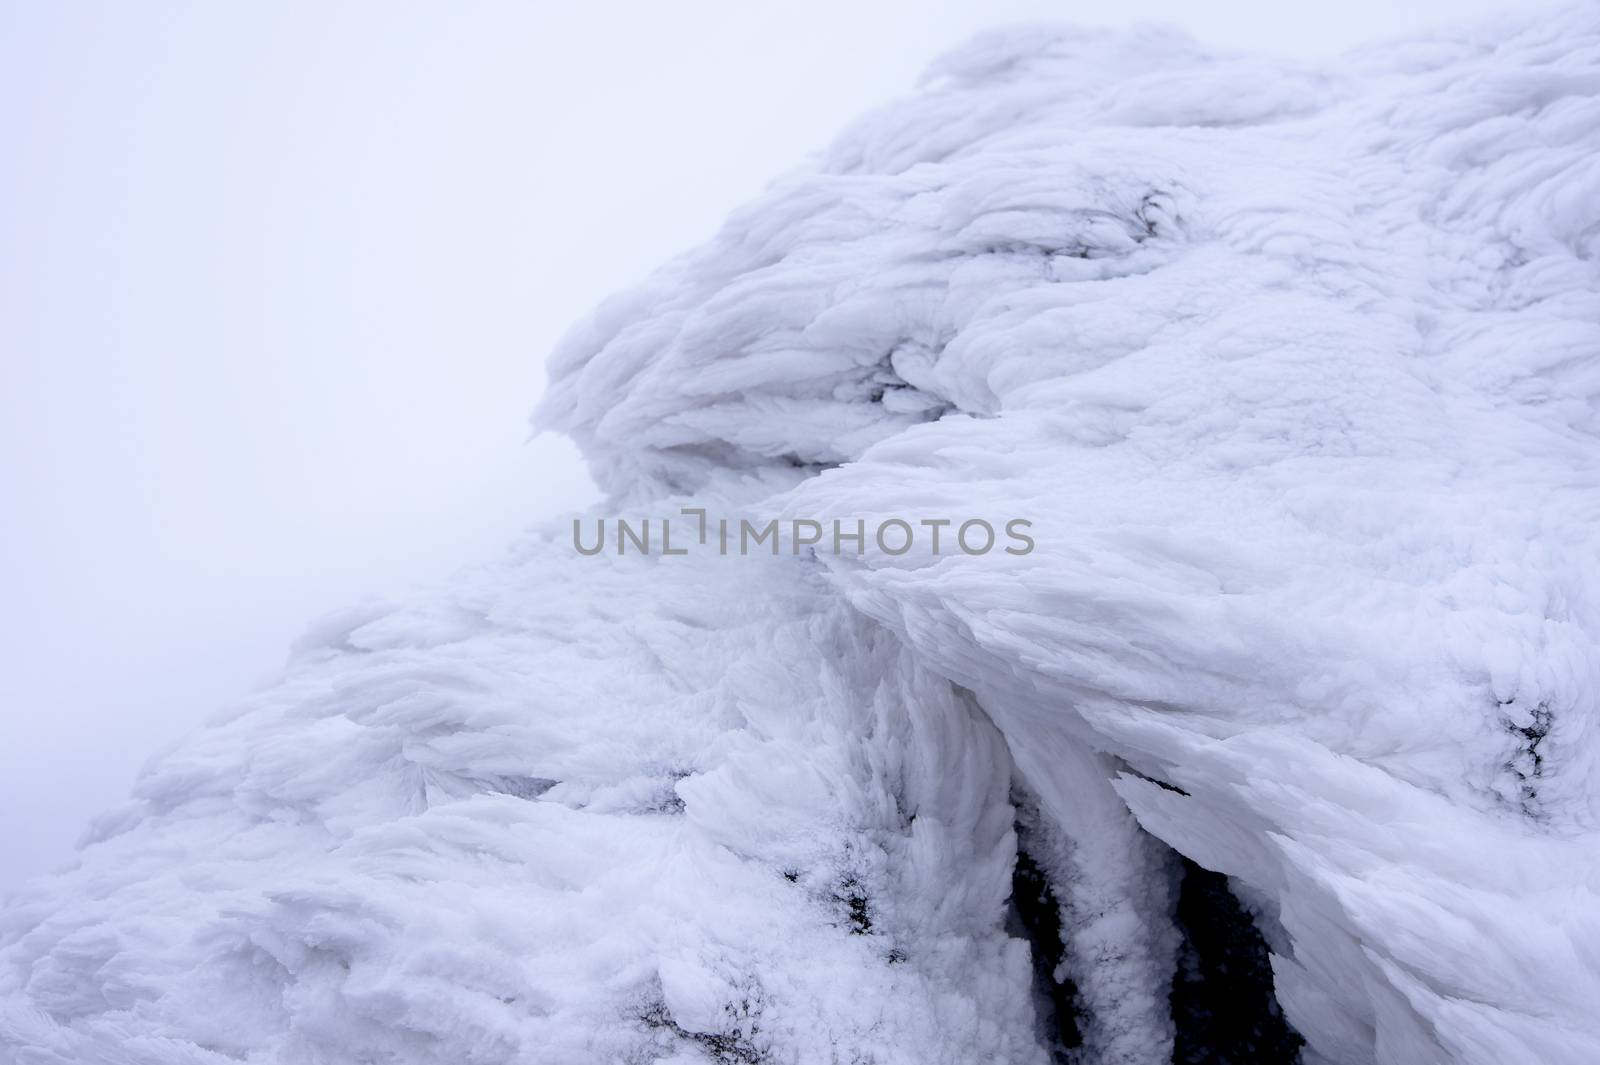 Wind painted Snow Texture Pattern on stone Background, Winter ba by gutarphotoghaphy